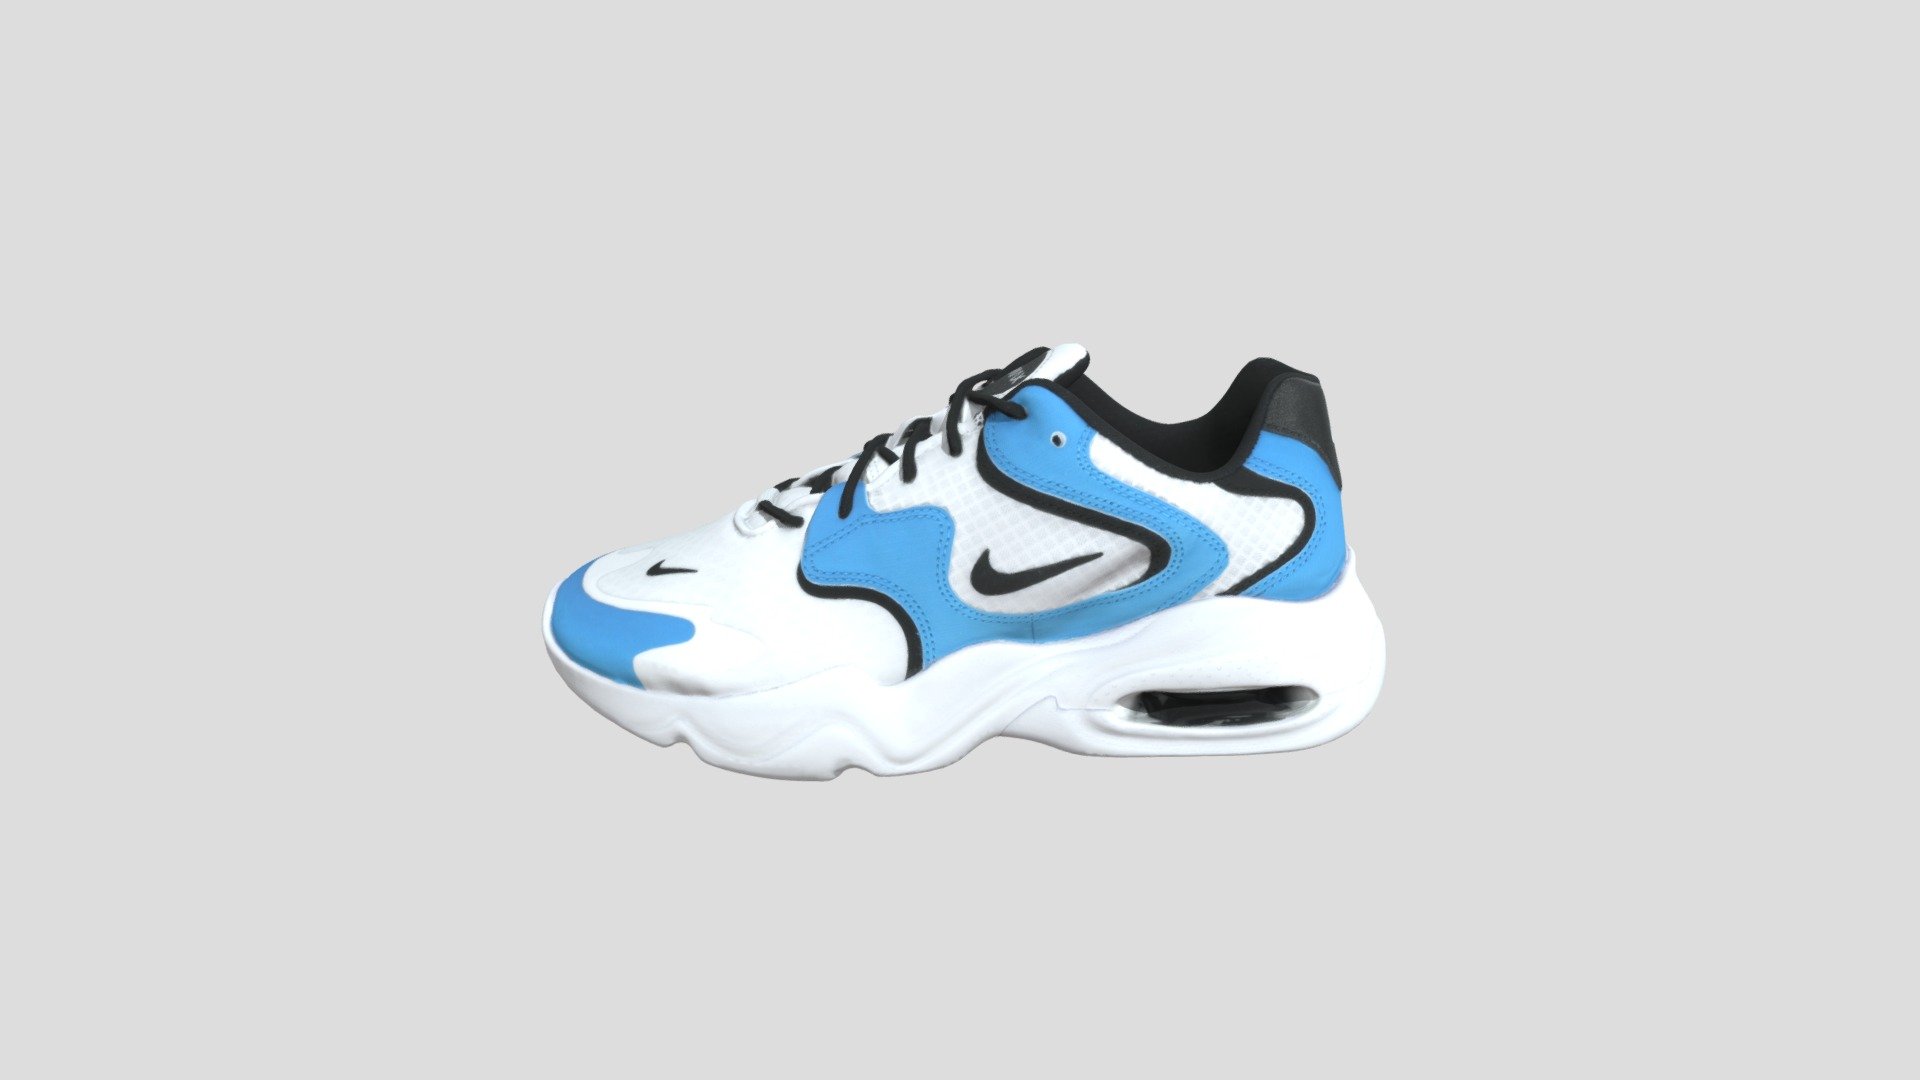 This model was created firstly by 3D scanning on retail version, and then being detail-improved manually, thus a 1:1 repulica of the original
PBR ready
Low-poly
4K texture
Welcome to check out other models we have to offer. And we do accept custom orders as well :) - Nike Air Max 2X 缓震跑鞋 白蓝_CK2943-102 - Buy Royalty Free 3D model by TRARGUS 3d model